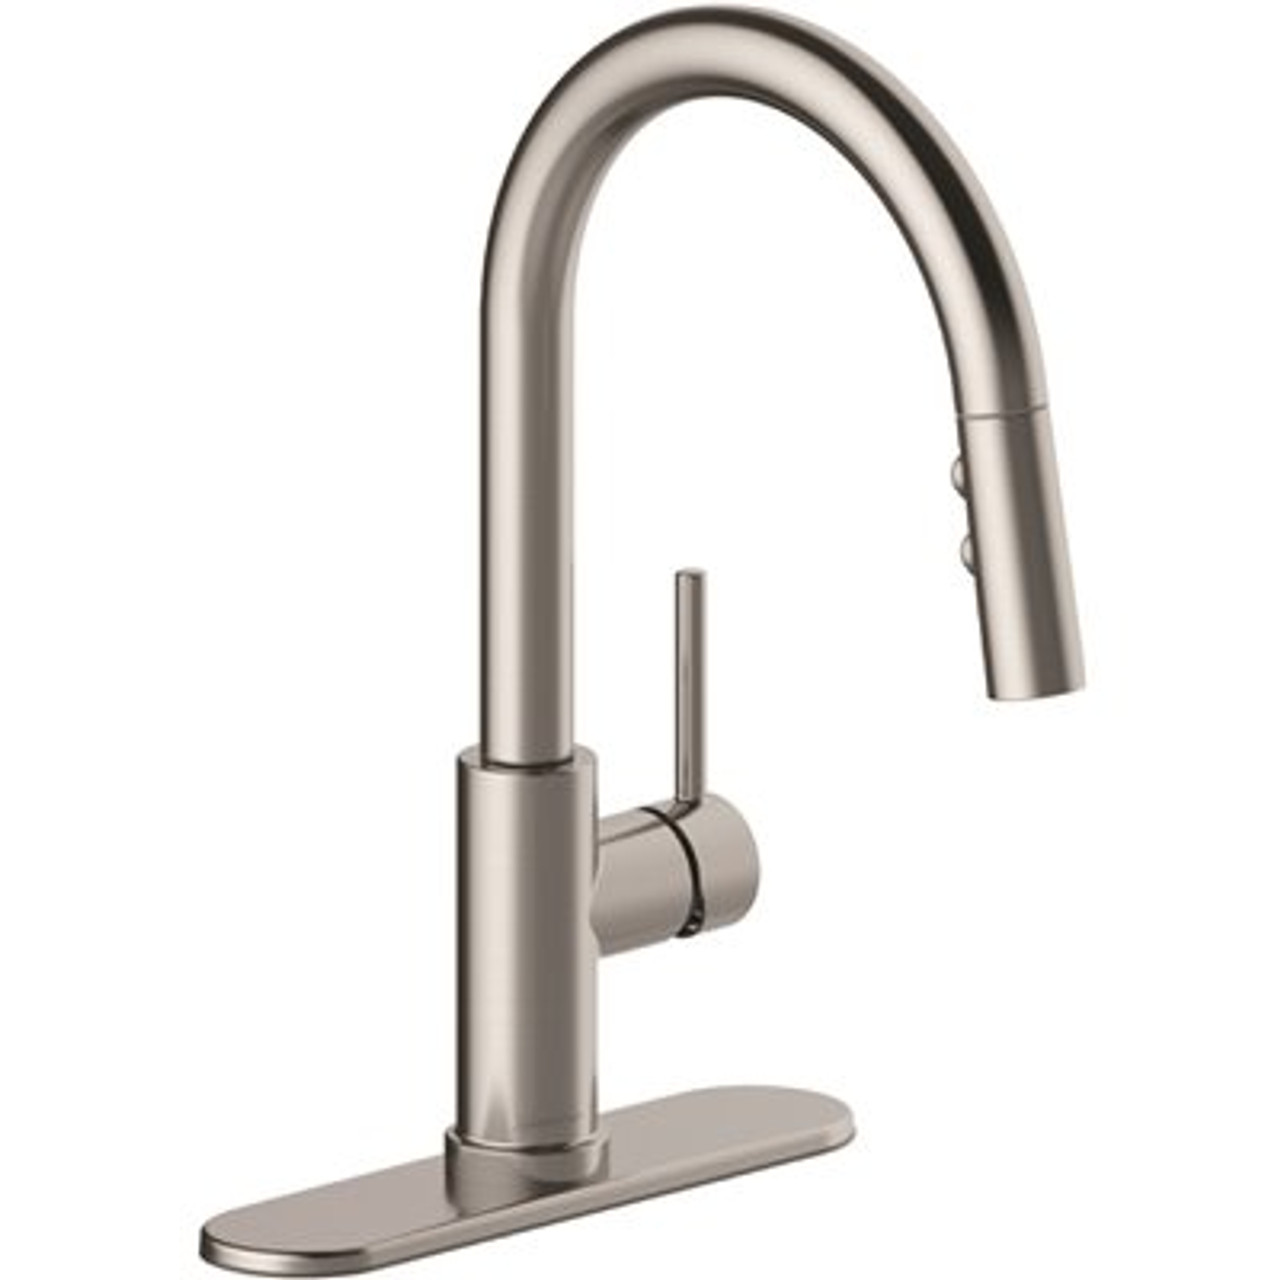 Seasons Westwind Single-Handle Pull-Down Sprayer Kitchen Faucet in Stainless Steel